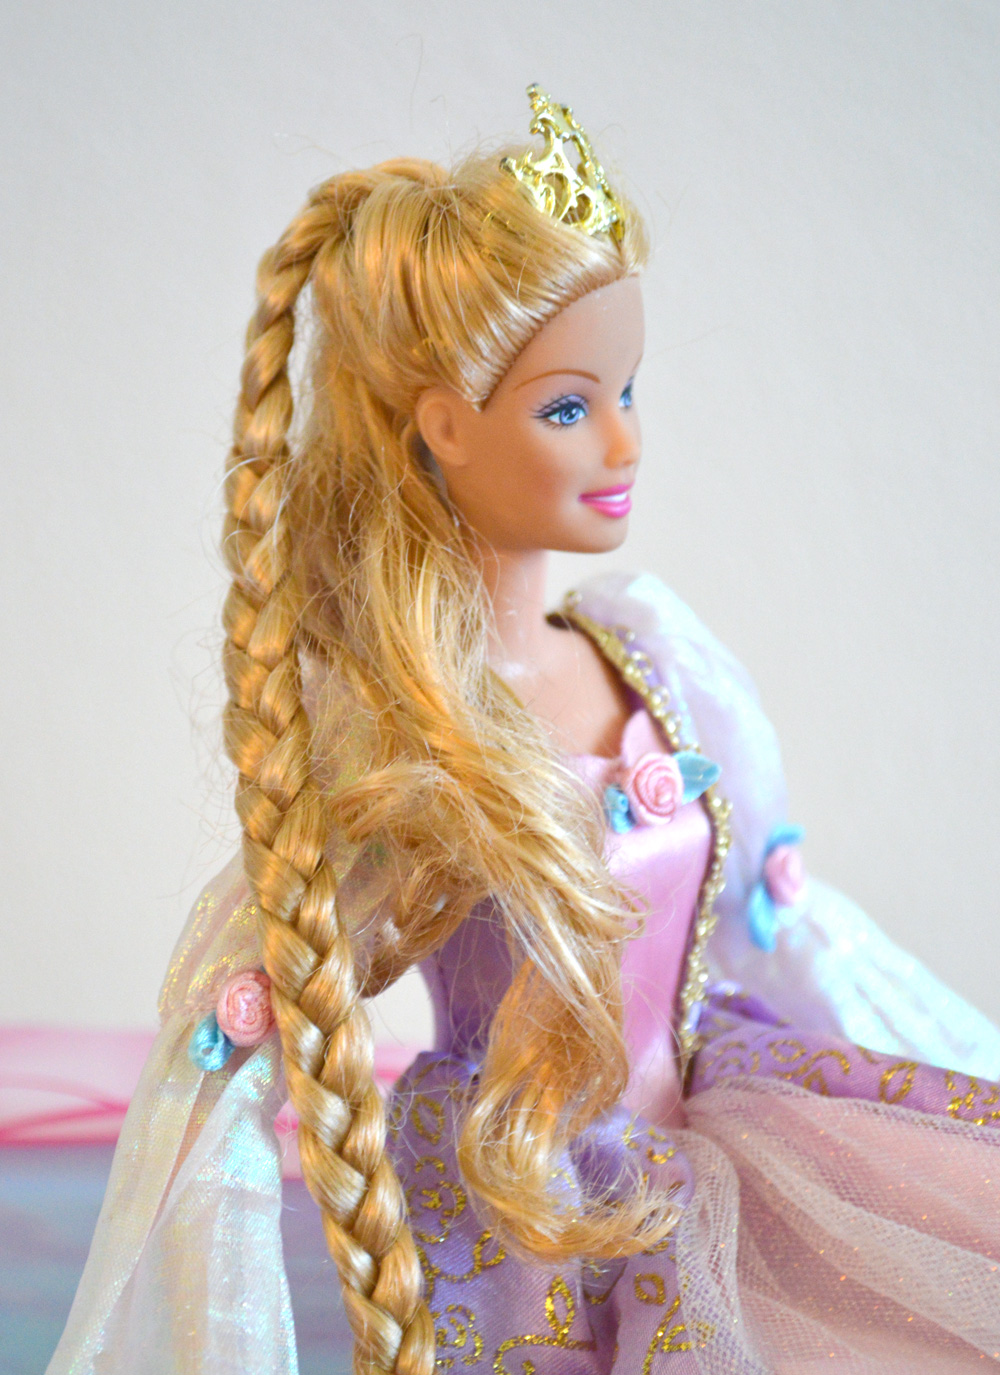 How to detangle doll hair and give your Barbie a makeover